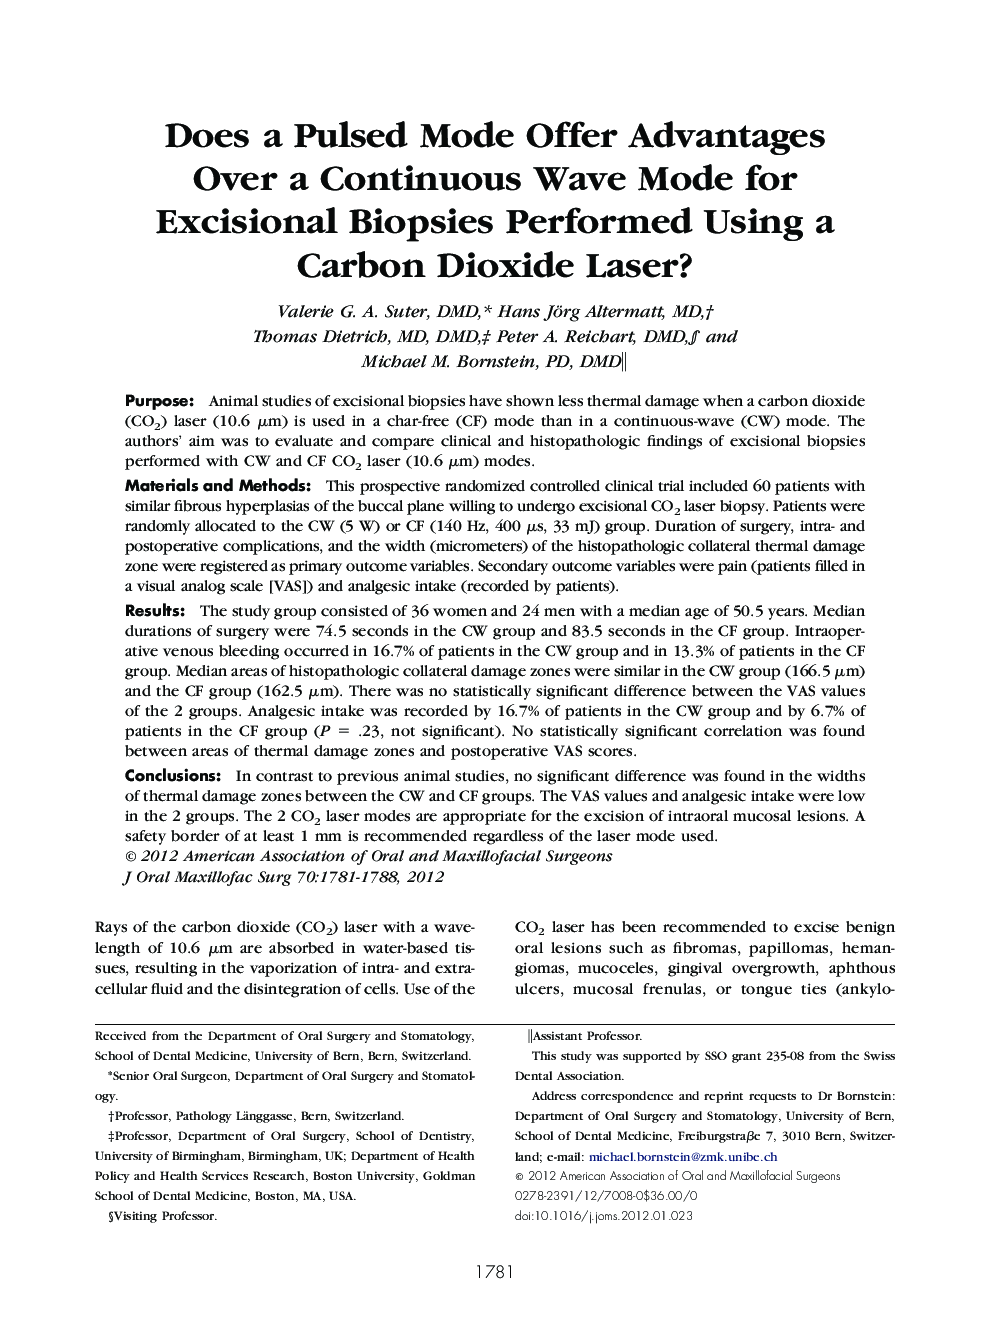 Does a Pulsed Mode Offer Advantages Over a Continuous Wave Mode for Excisional Biopsies Performed Using a Carbon Dioxide Laser?